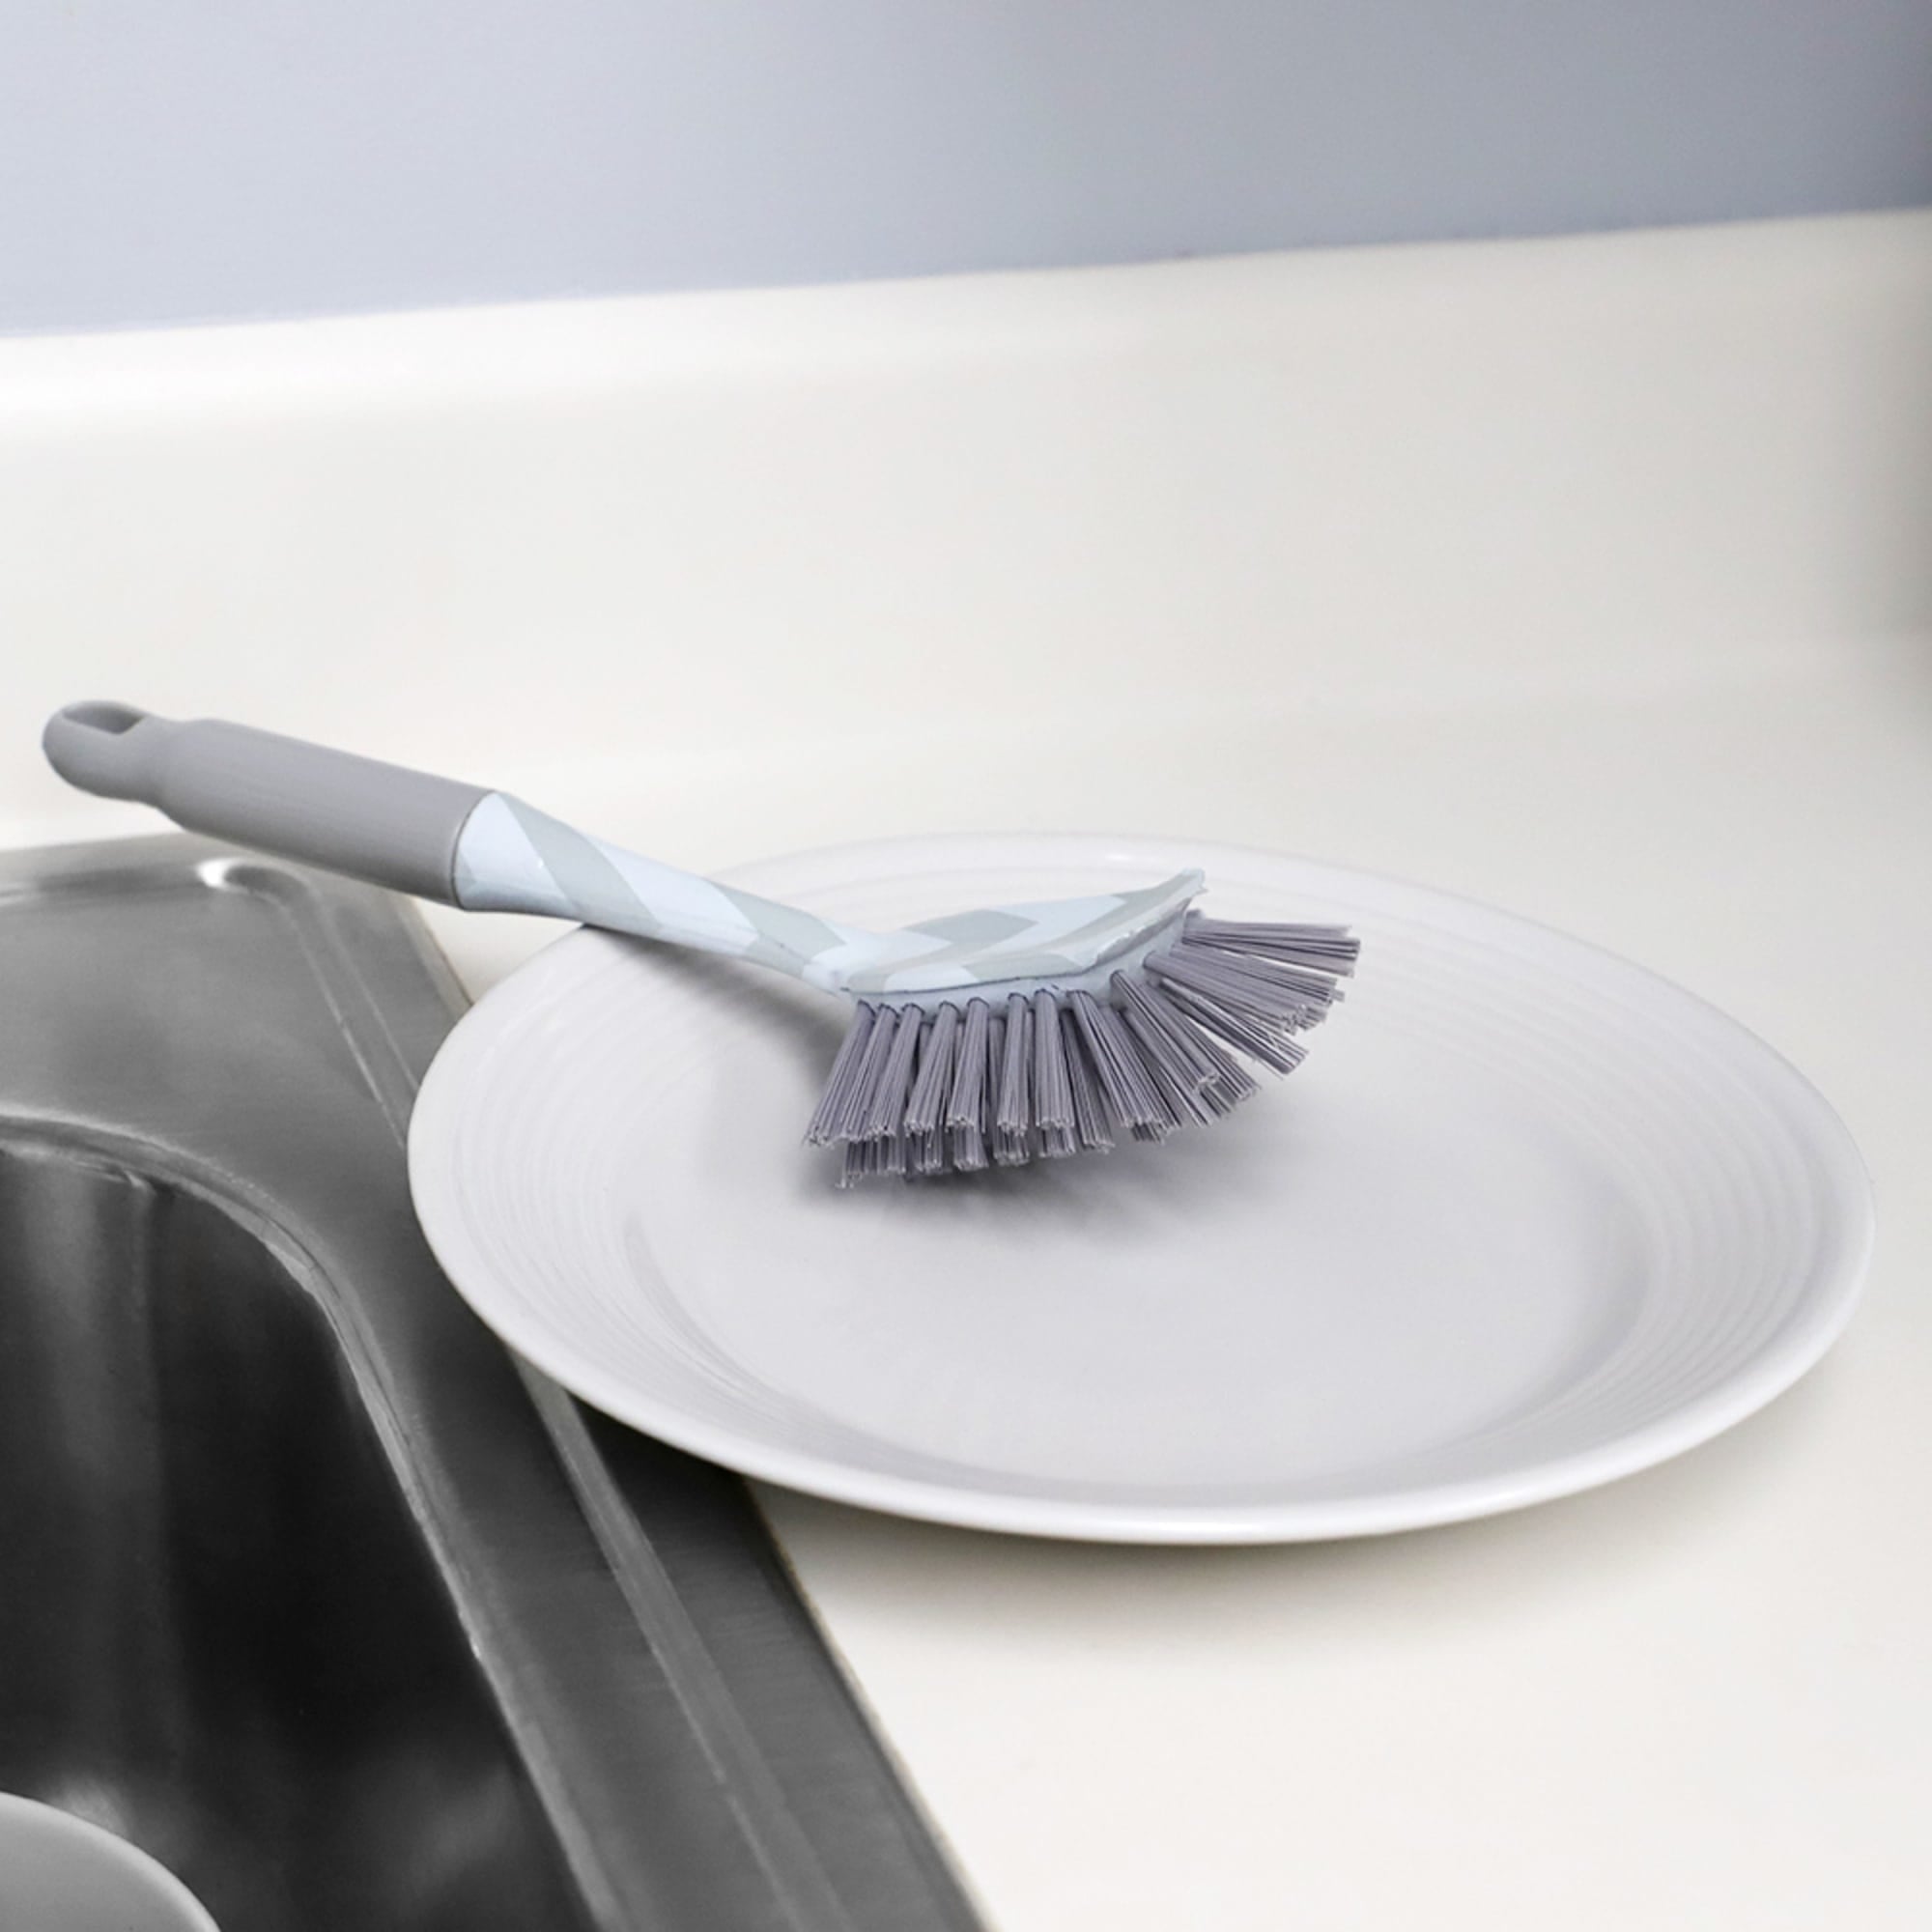 Home Basics Chevron Plastic Dish Brush with Long Non-slip Rubber Handle, Grey $2.00 EACH, CASE PACK OF 12